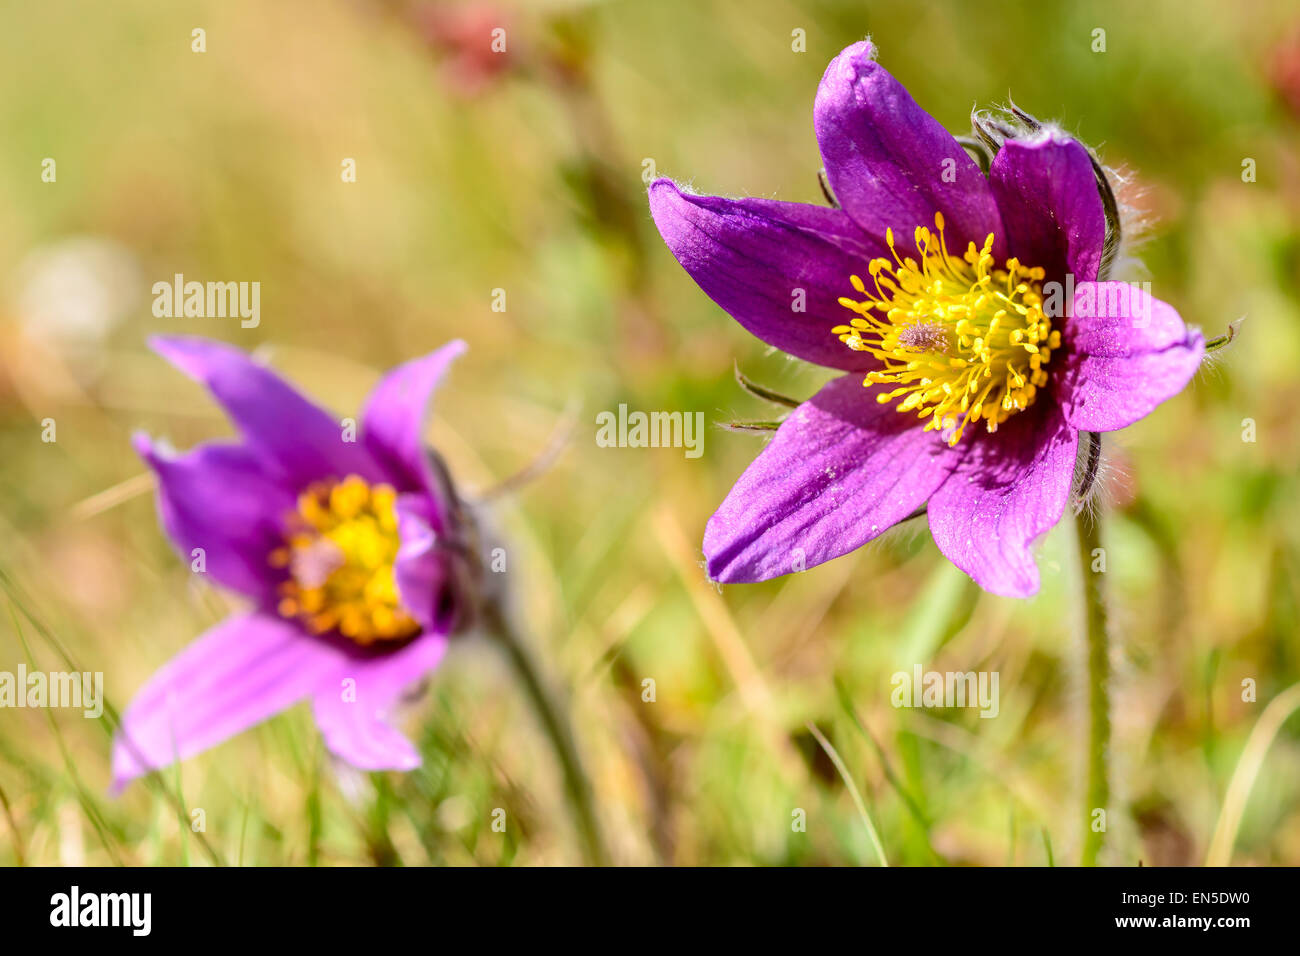 Pasque flower (Pulsatilla vulgaris). Also known as  pasqueflower, common pasque flower or Dane's blood. Here seen close up in su Stock Photo